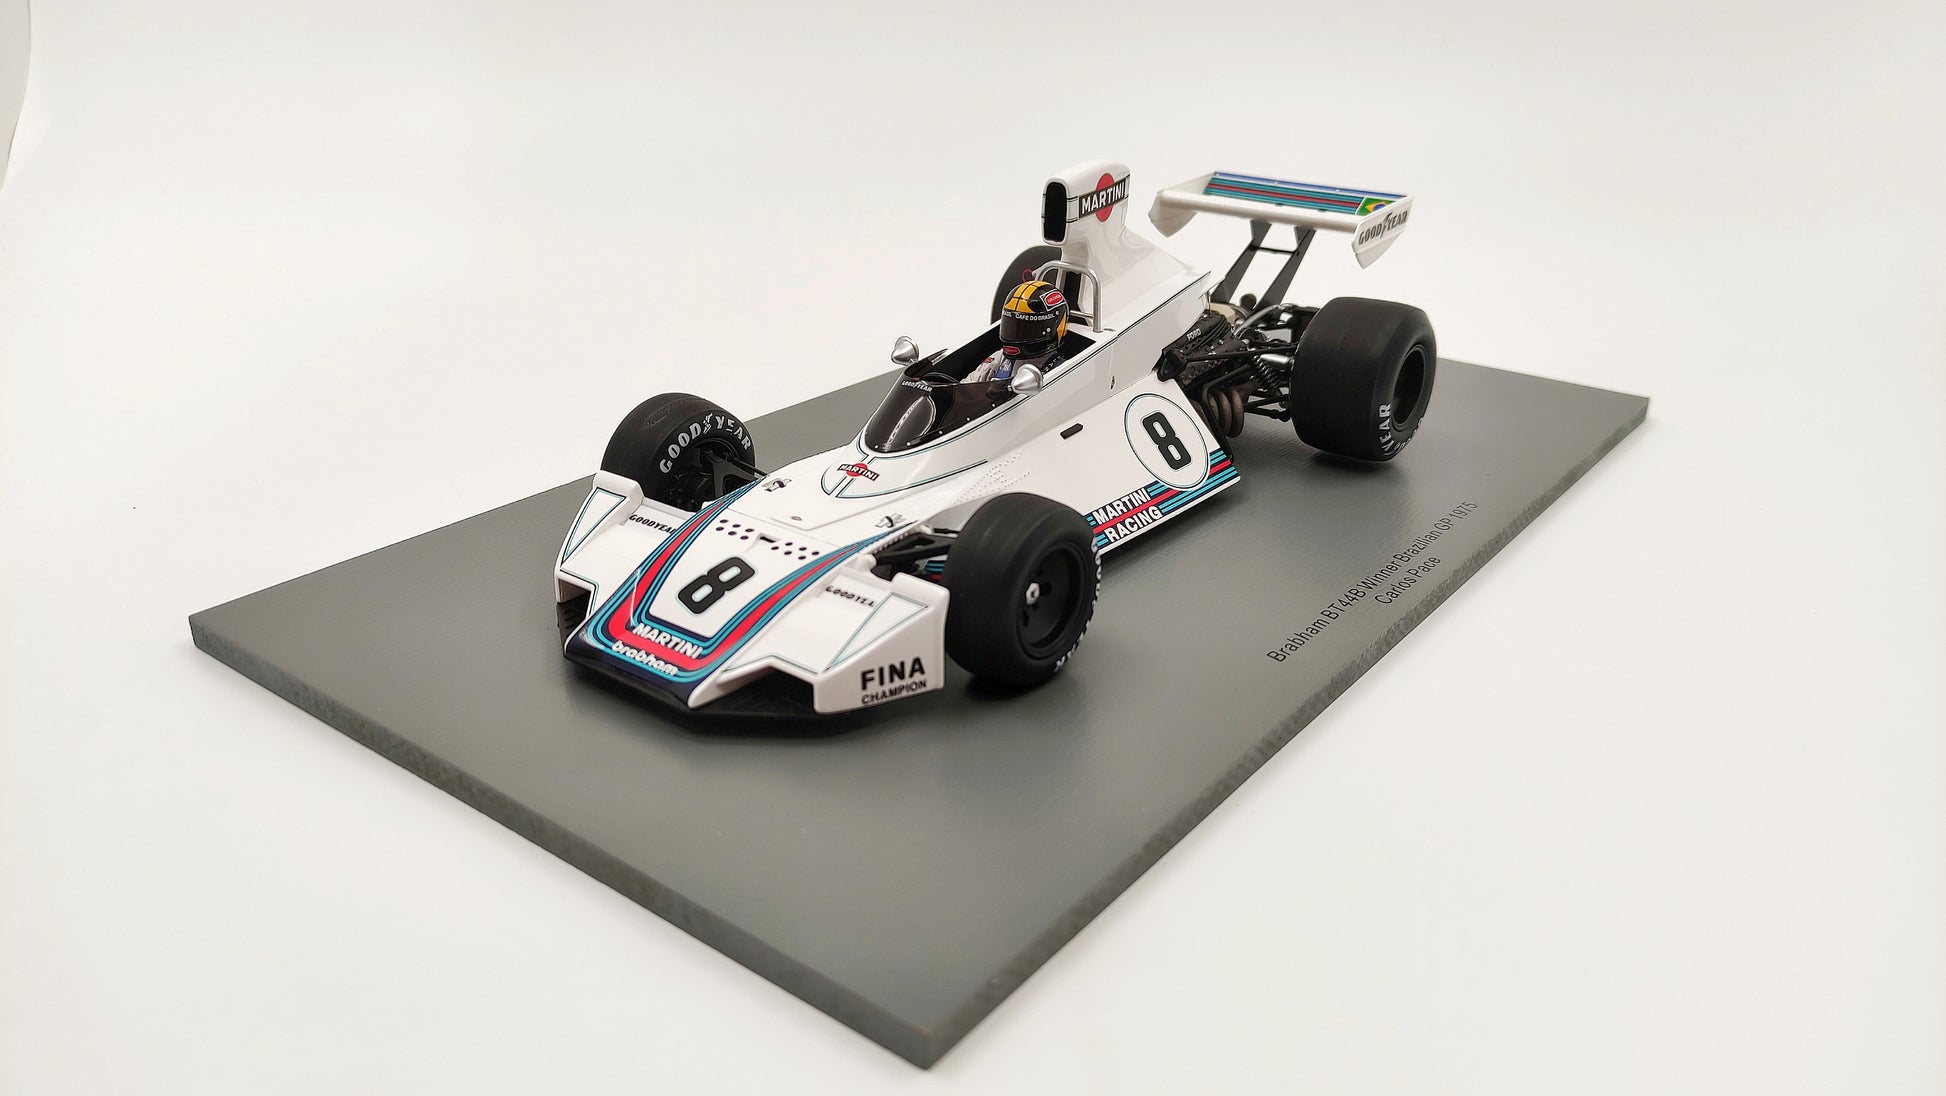 1:43 Scale Model of a Brabham BT44B F1 Car as Raced by Carlos Pace in the  1975 Brazilian Grand Prix -  Canada